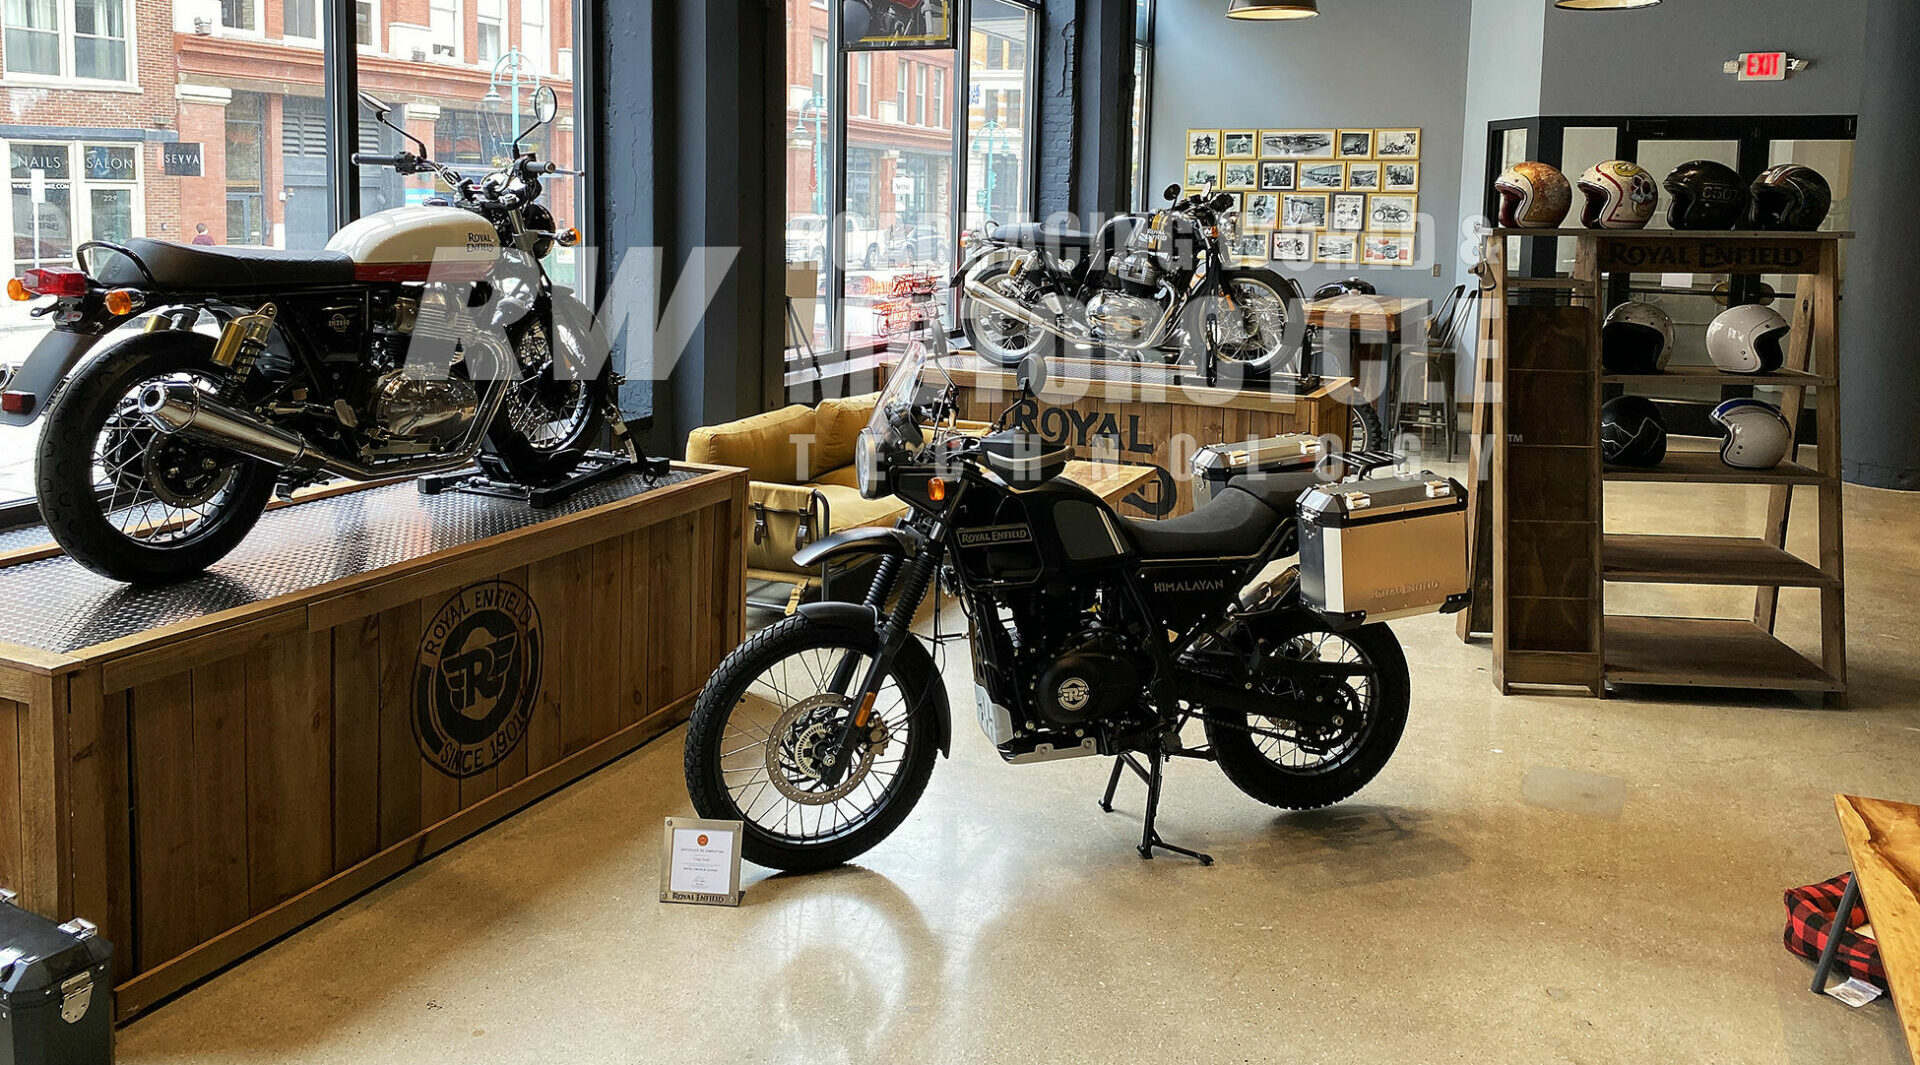 The front space on the ground floor of company headquarters is now being used as a Royal Enfield Experience venue, showcasing motorcycle models, accessories, artwork, and memorabilia. The brand's best-selling model is the 411cc single-cylinder Himalayan seen parked in the foreground, with two twin-cylinder 650cc models on display pedestals.